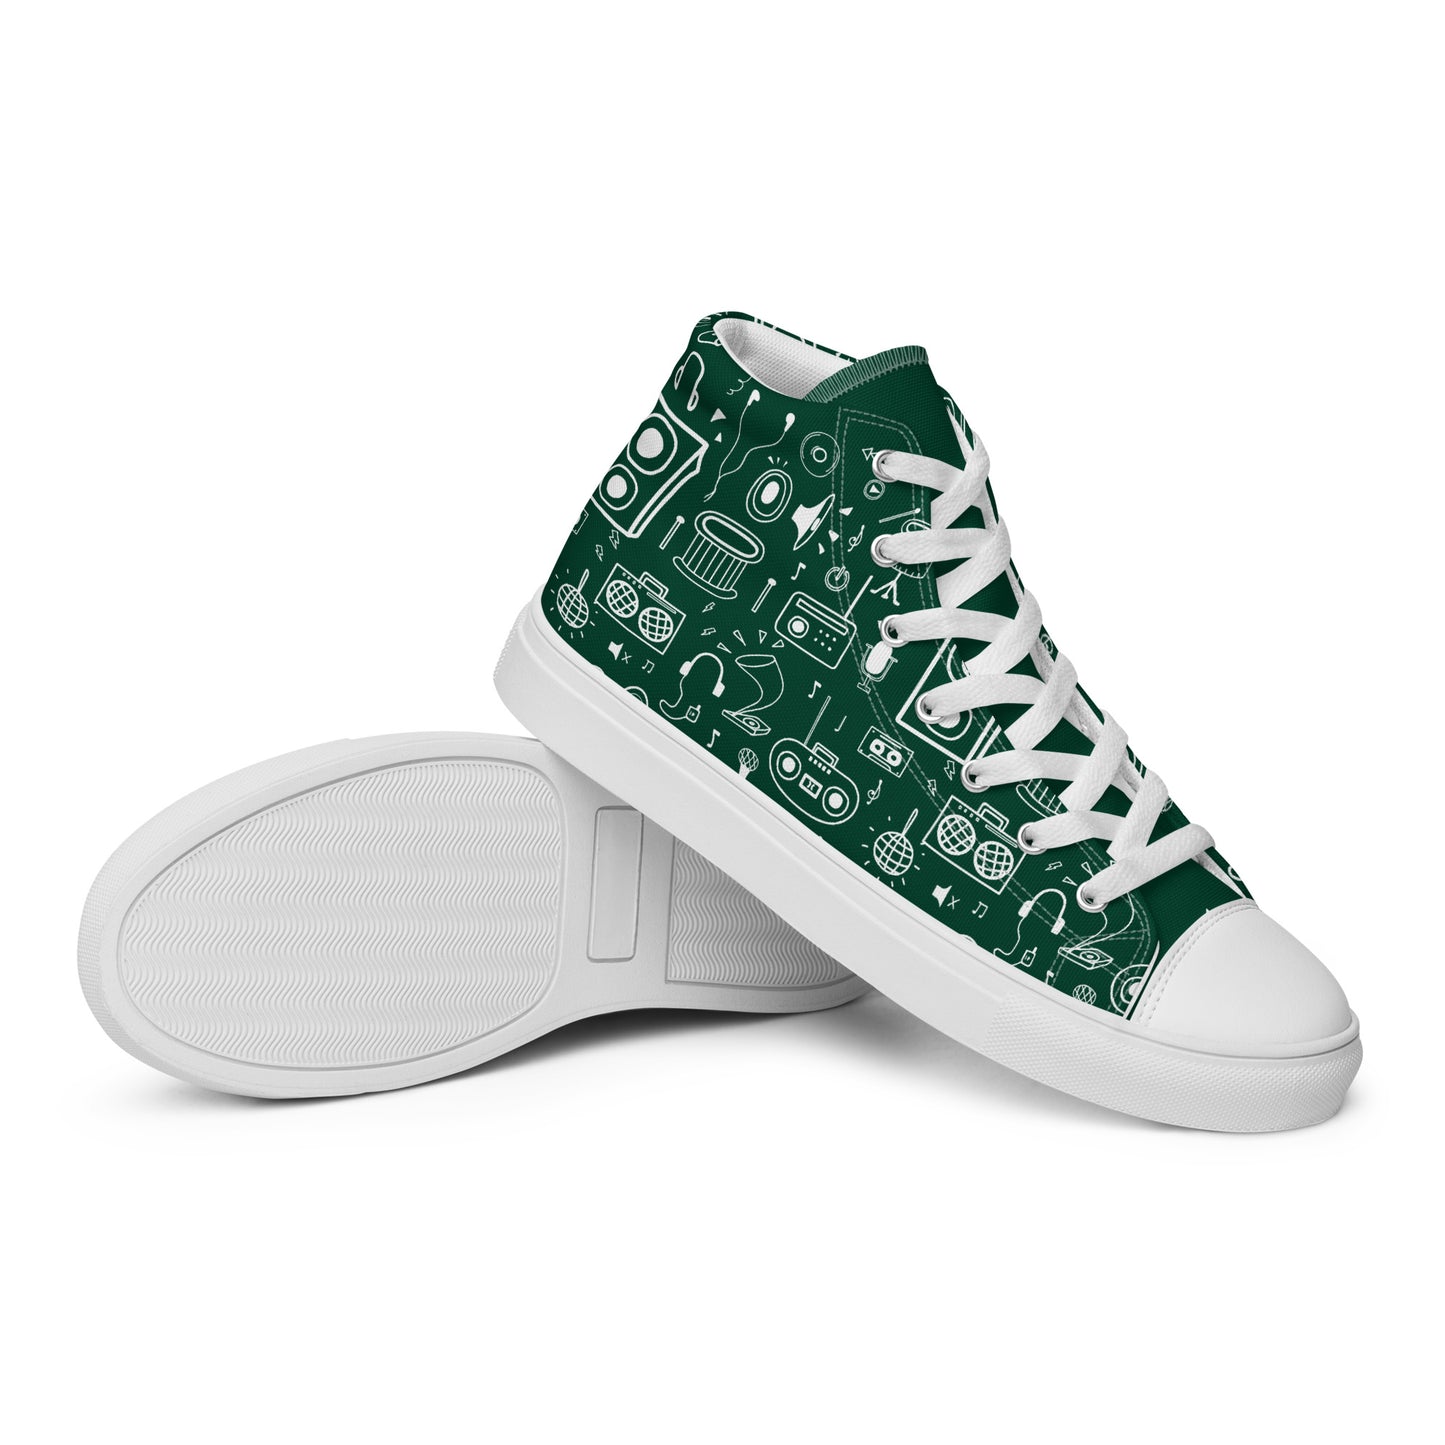 All The Music - Men’s high top canvas shoes Mens High Top Shoes Outside Australia